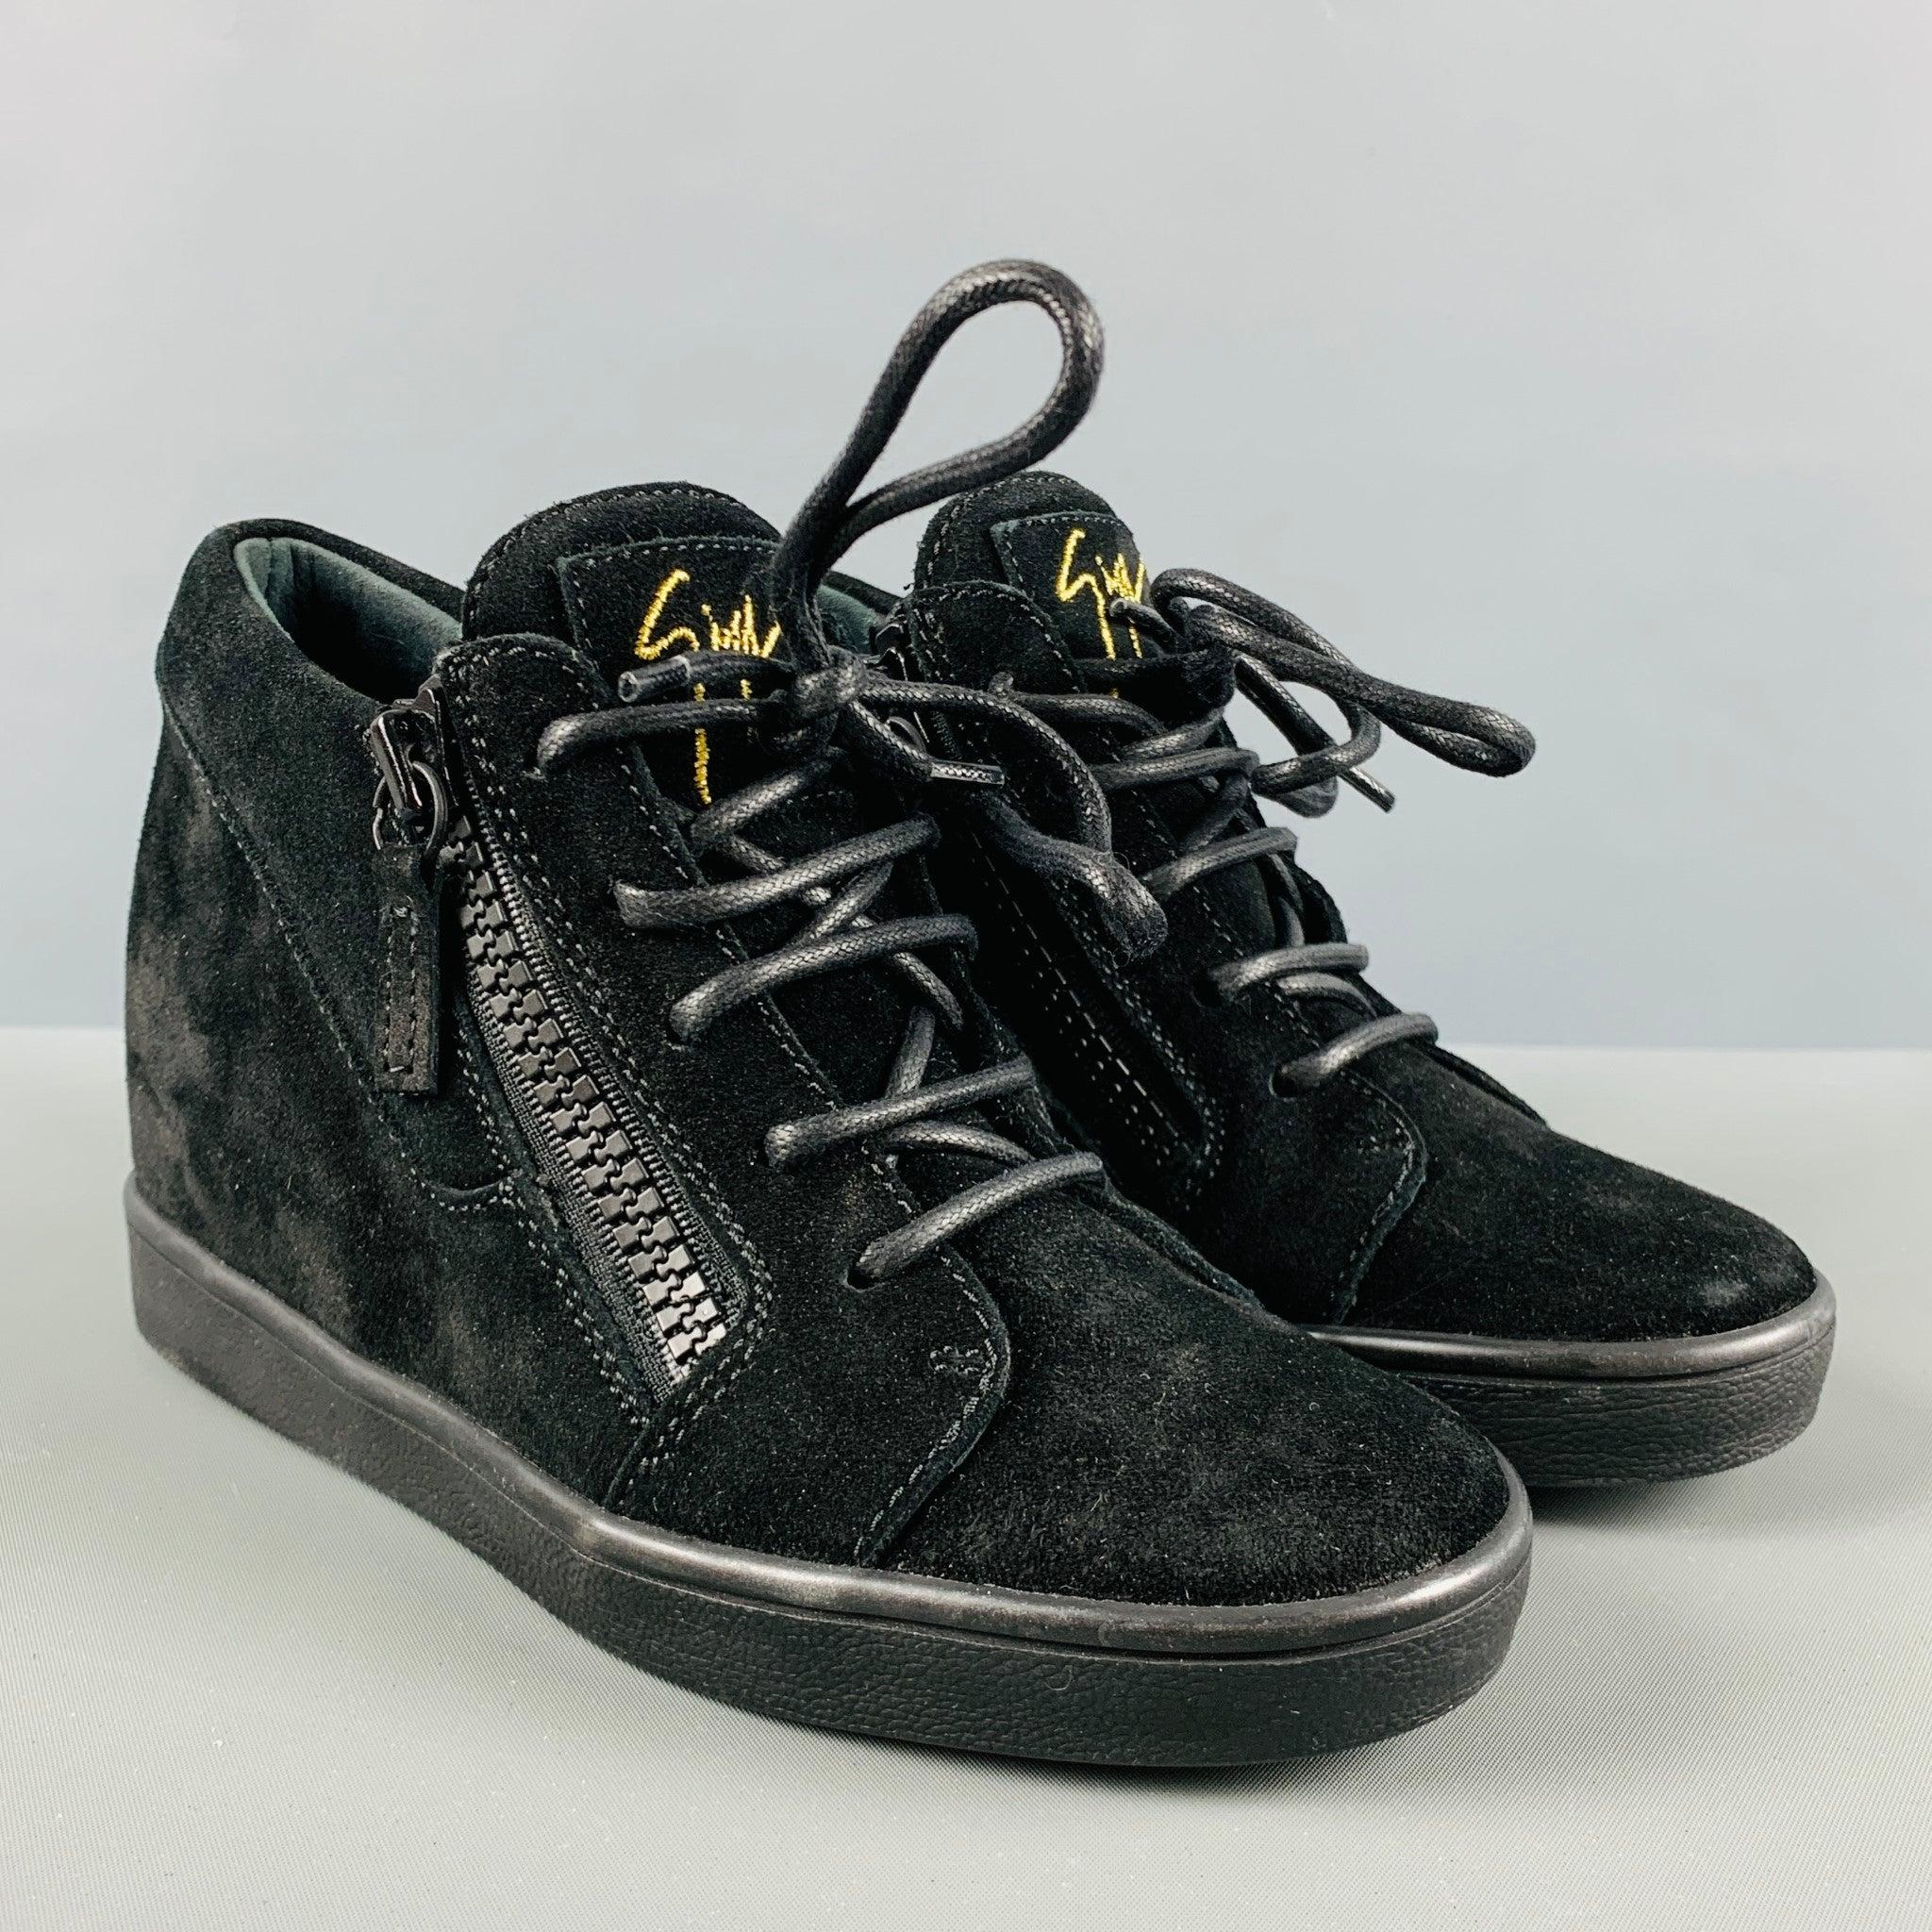 GIUSEPPE ZANOTTI sneakers comes in a black suede featuring a wedge style, rubber sole, and a lace up closure. Comes with box. Made in Italy.Very Good Pre-Owned Condition. 

Marked:   35Outsole: 4 inches  x 11 inches 
 
  
  
 
Reference No.: